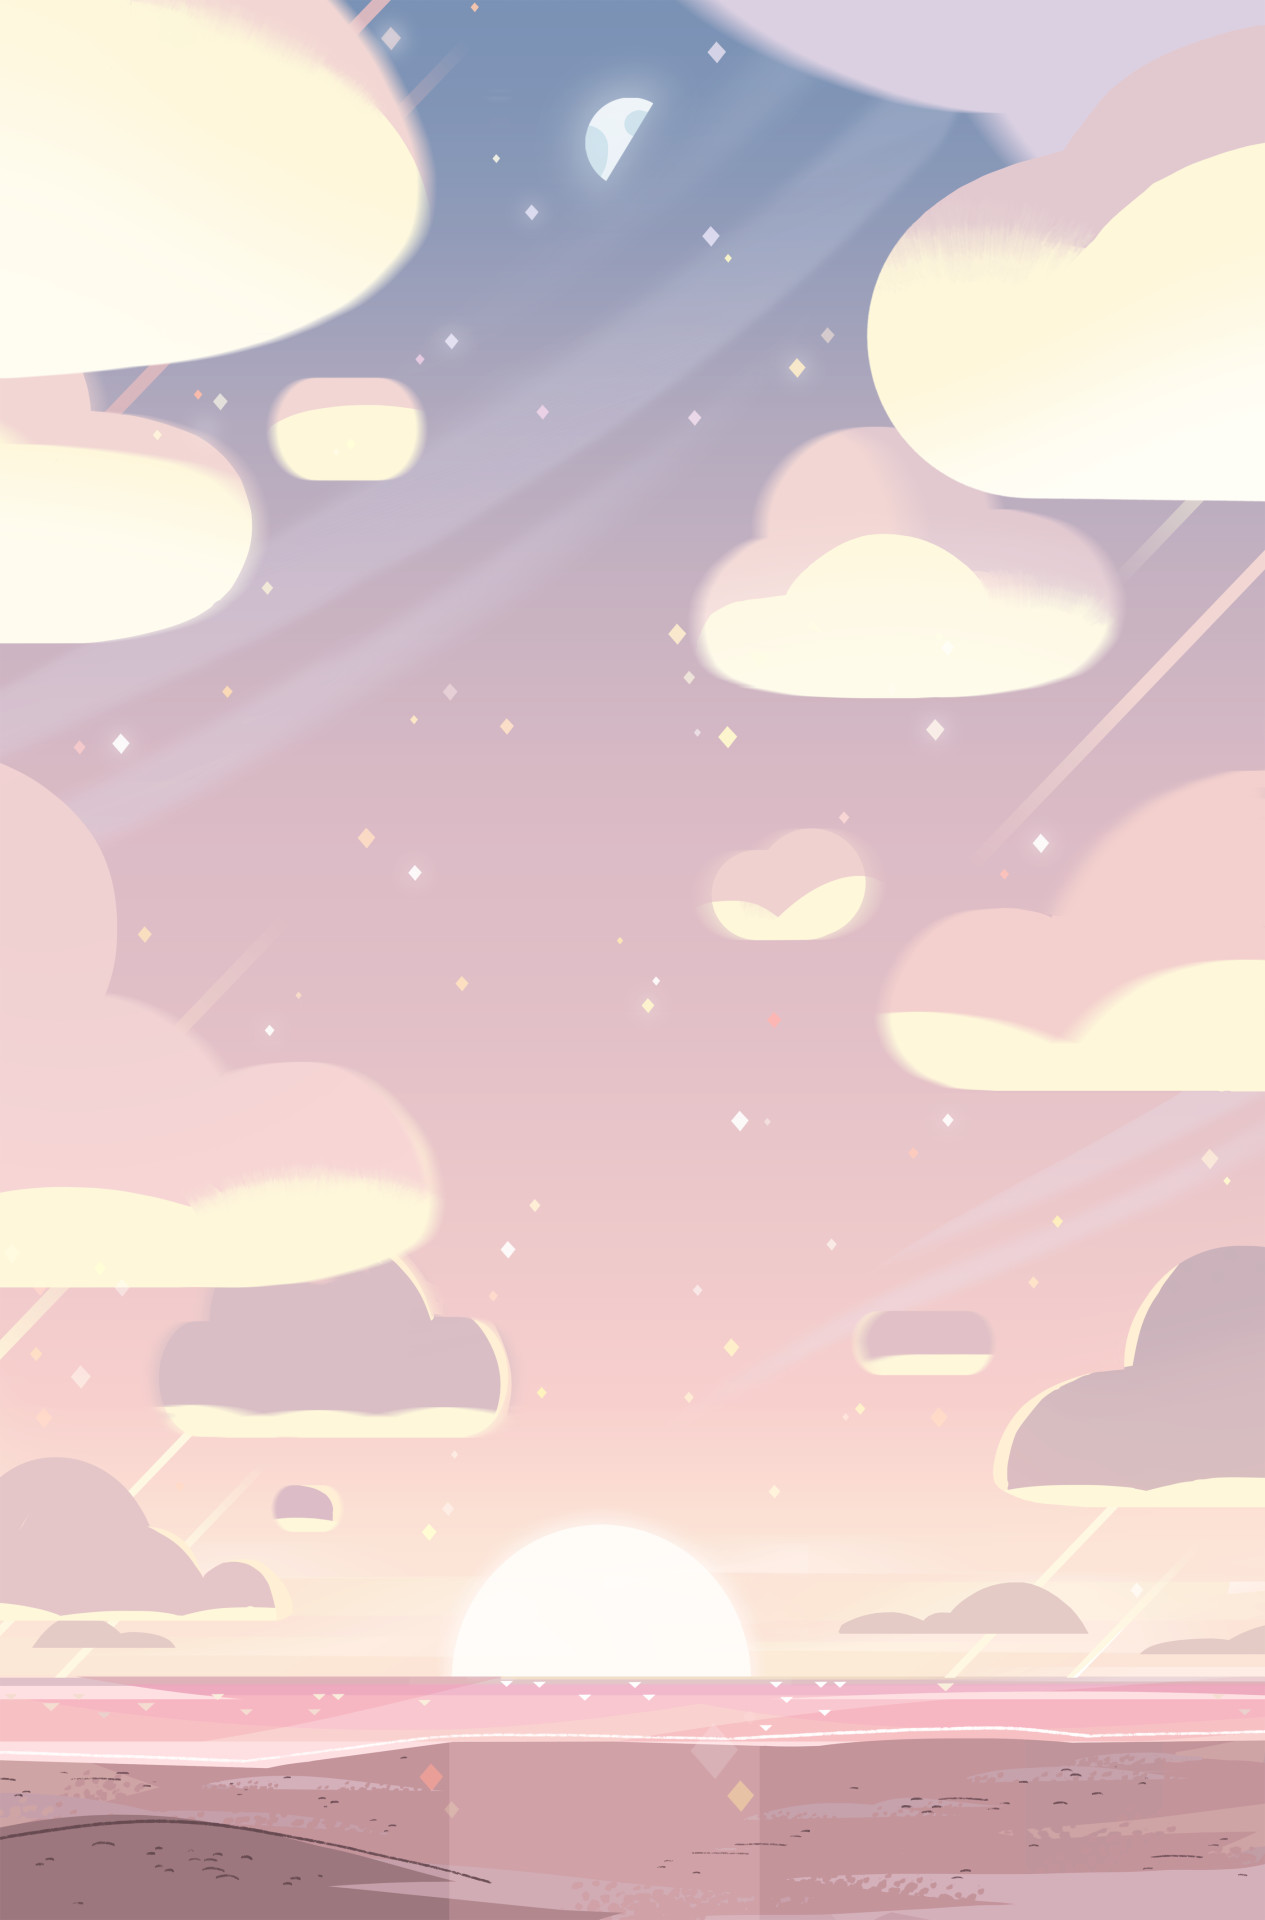 Steven Crewniverse Behind-The-Scenes Universe: A selection of Backgrounds  from the Steven